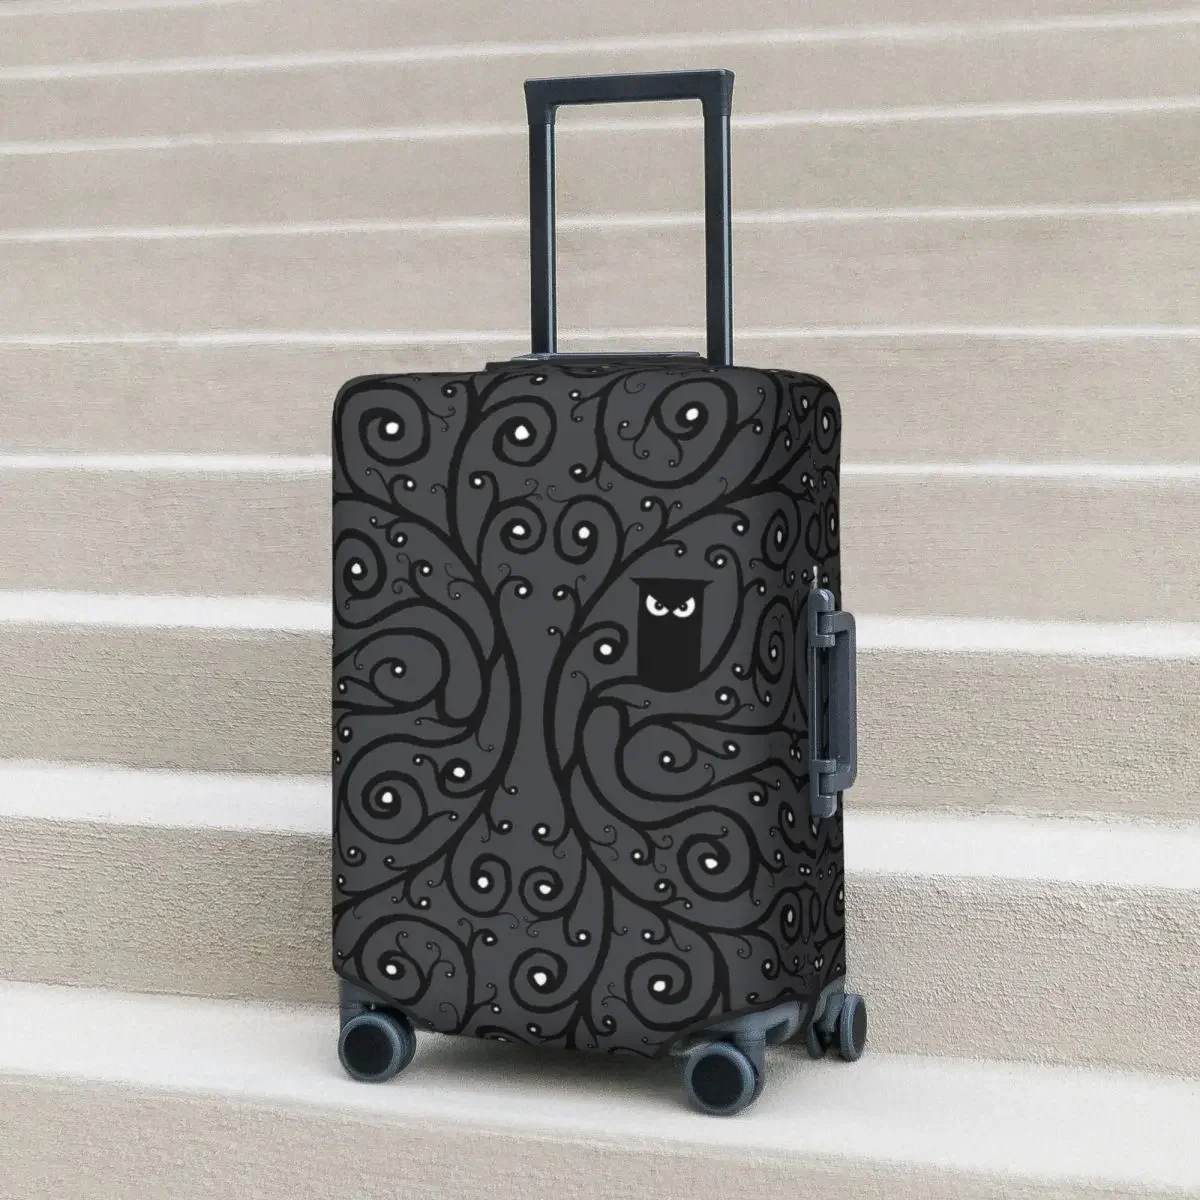 

The Owl Pattern Suitcase Cover Wildlife Animal Travel Holiday Practical Luggage Case Protector